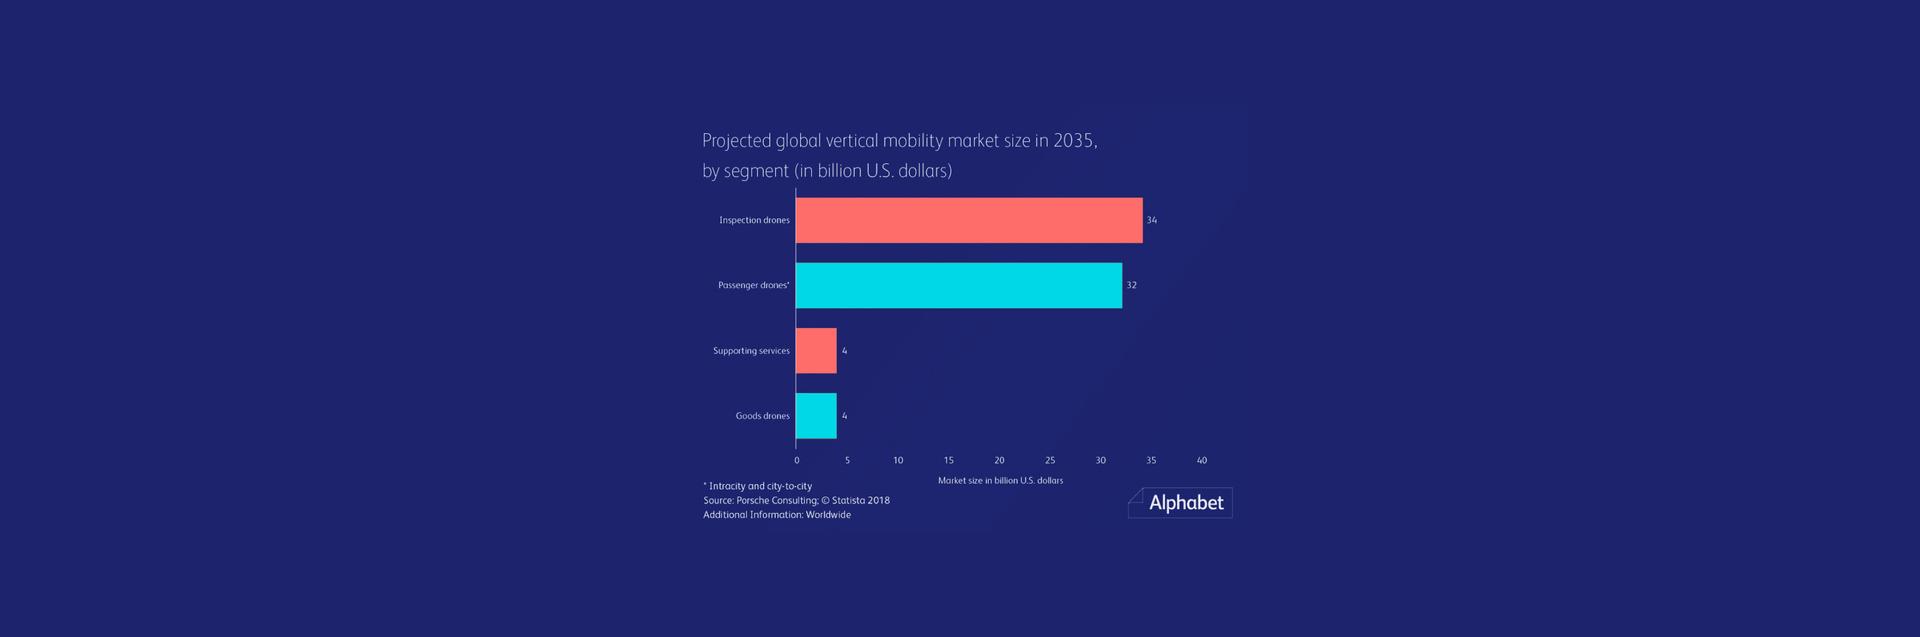  projected global vertical mobility market size in 2035